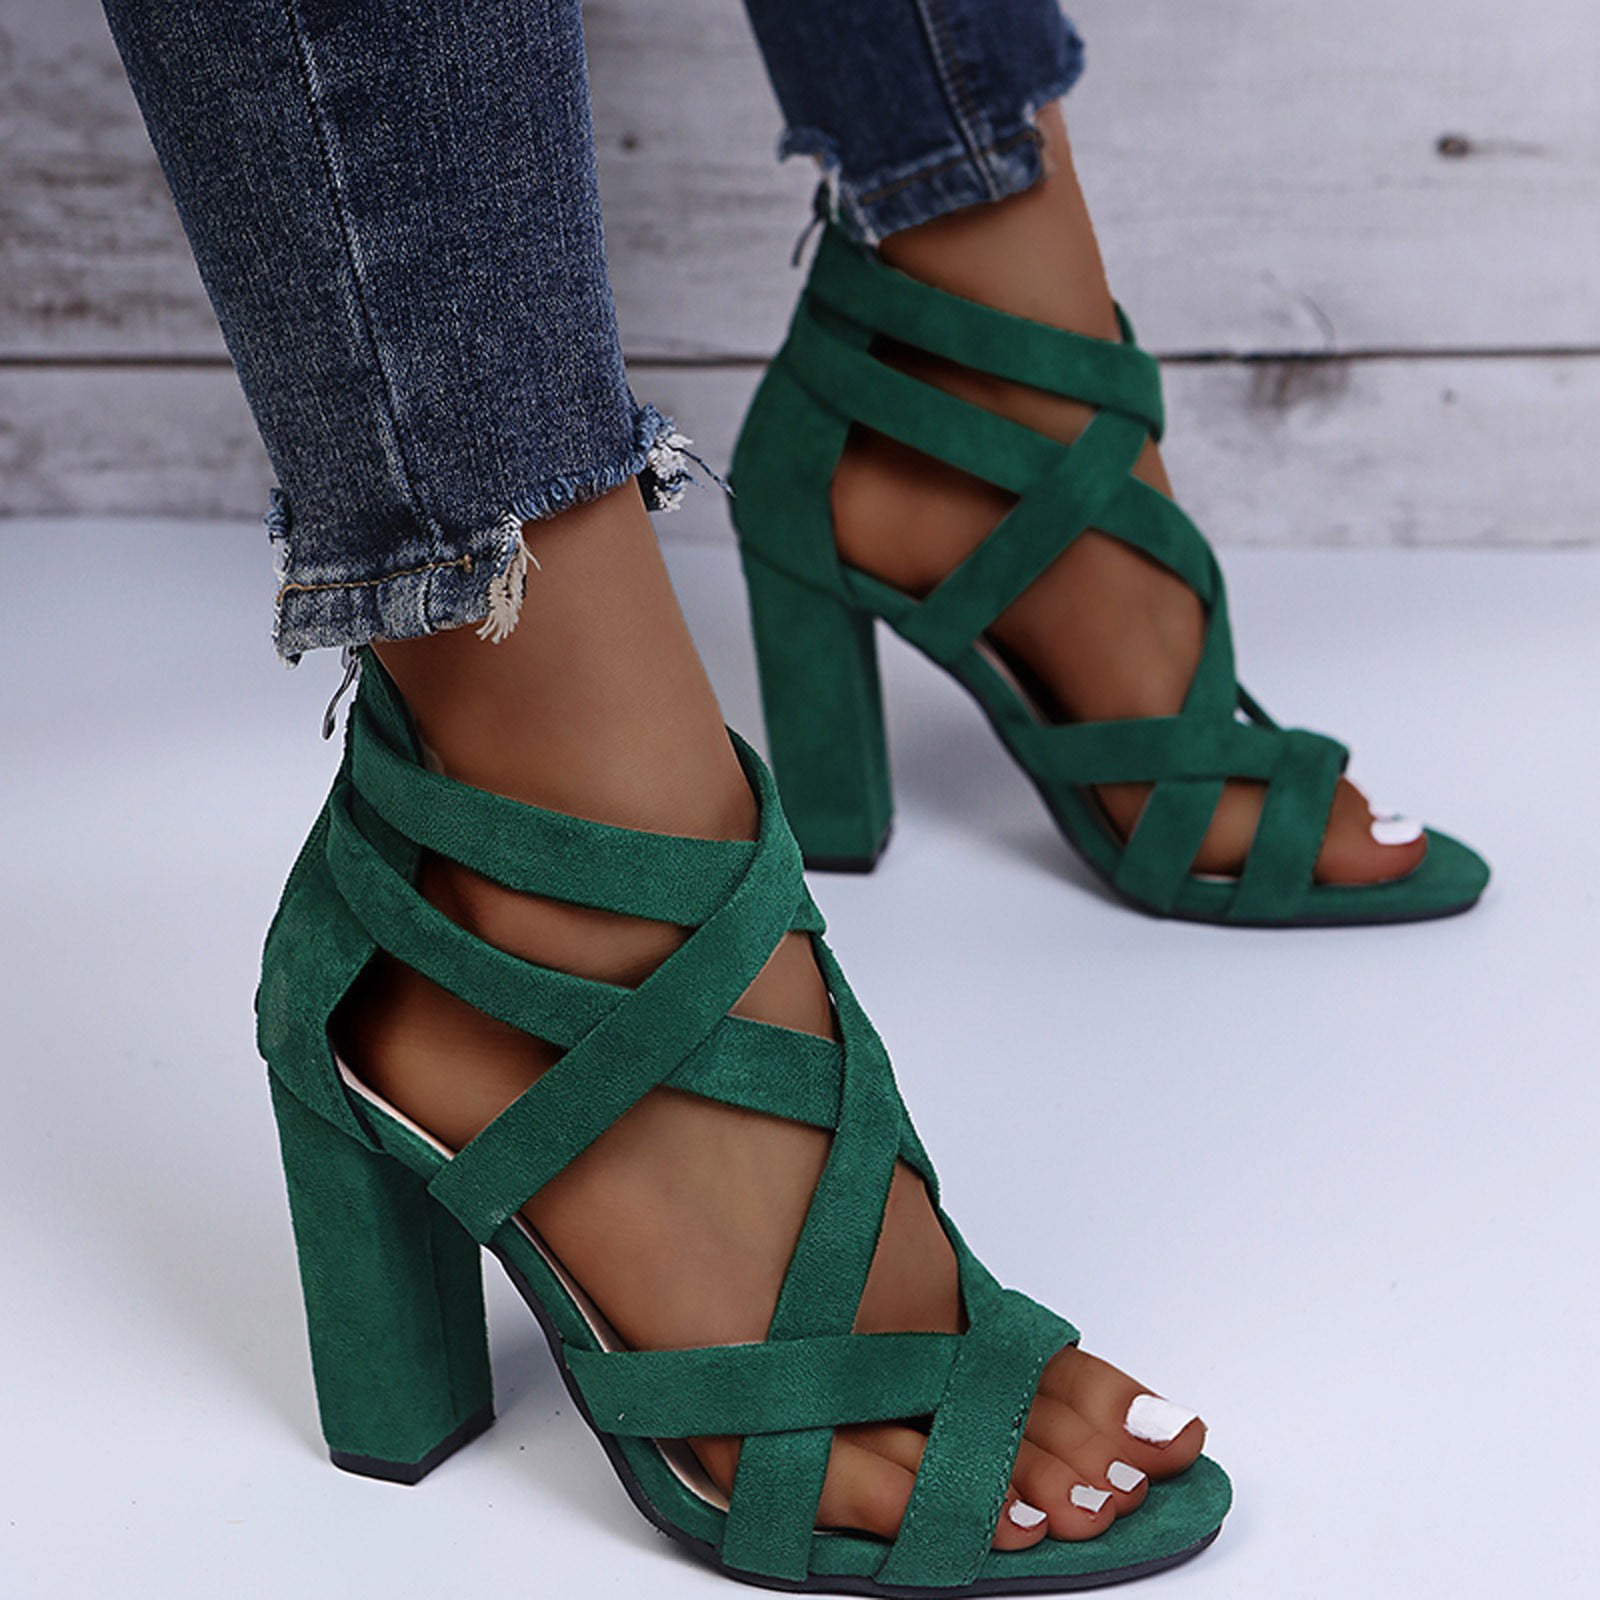 Green | Heeled Sandals | Strappy Sandals & Heels | OFFICE